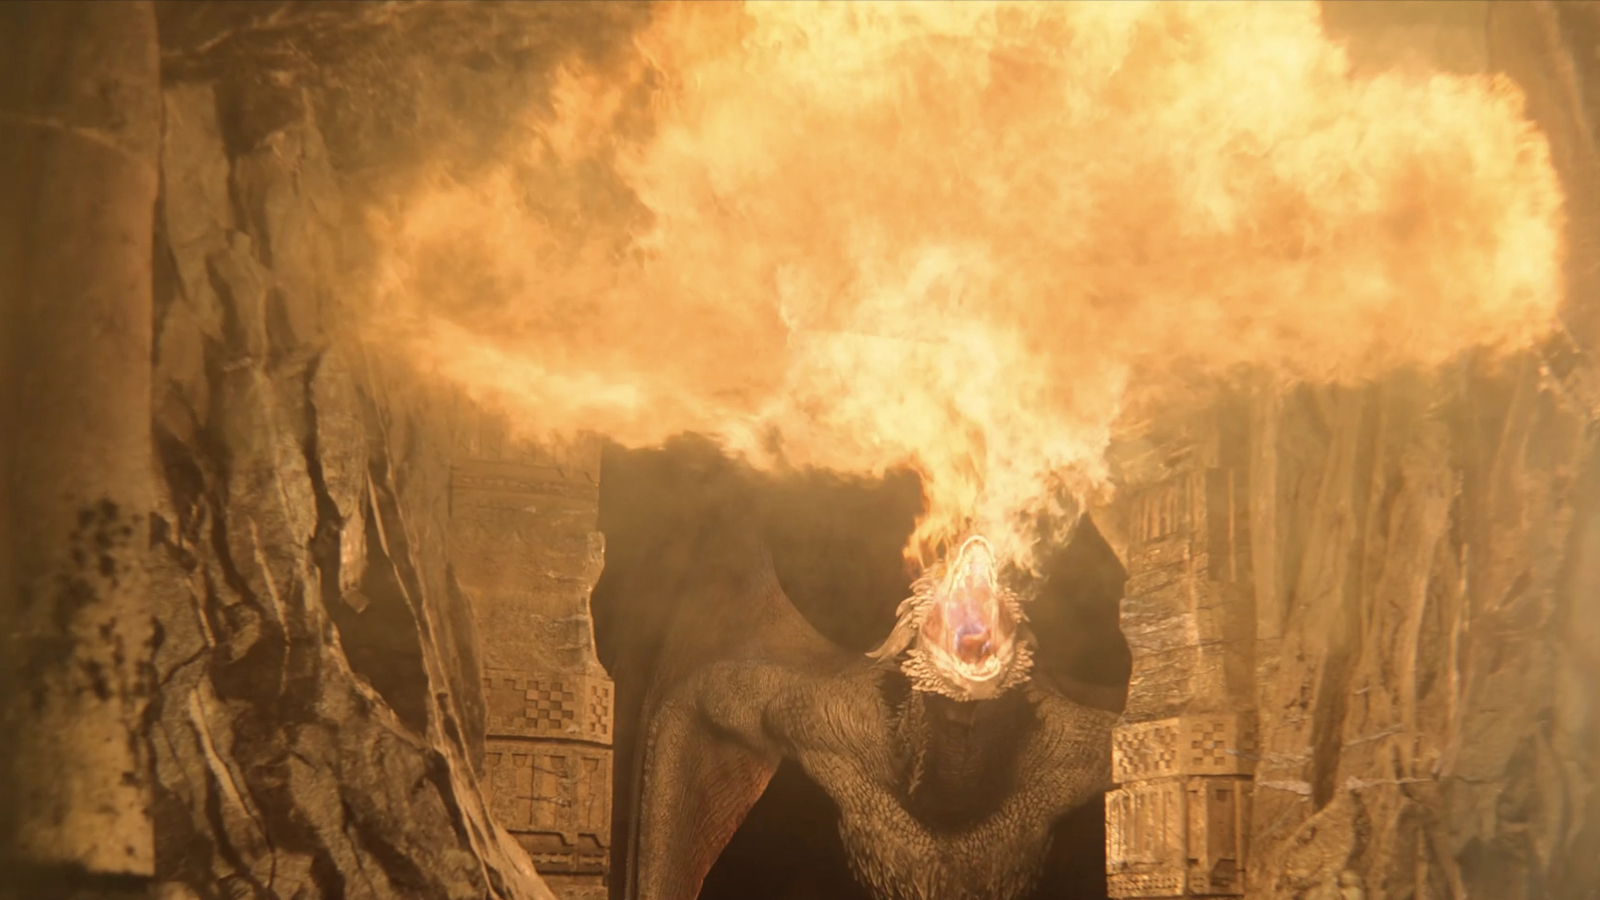 Dreamfyre breathing fire in House of the Dragon